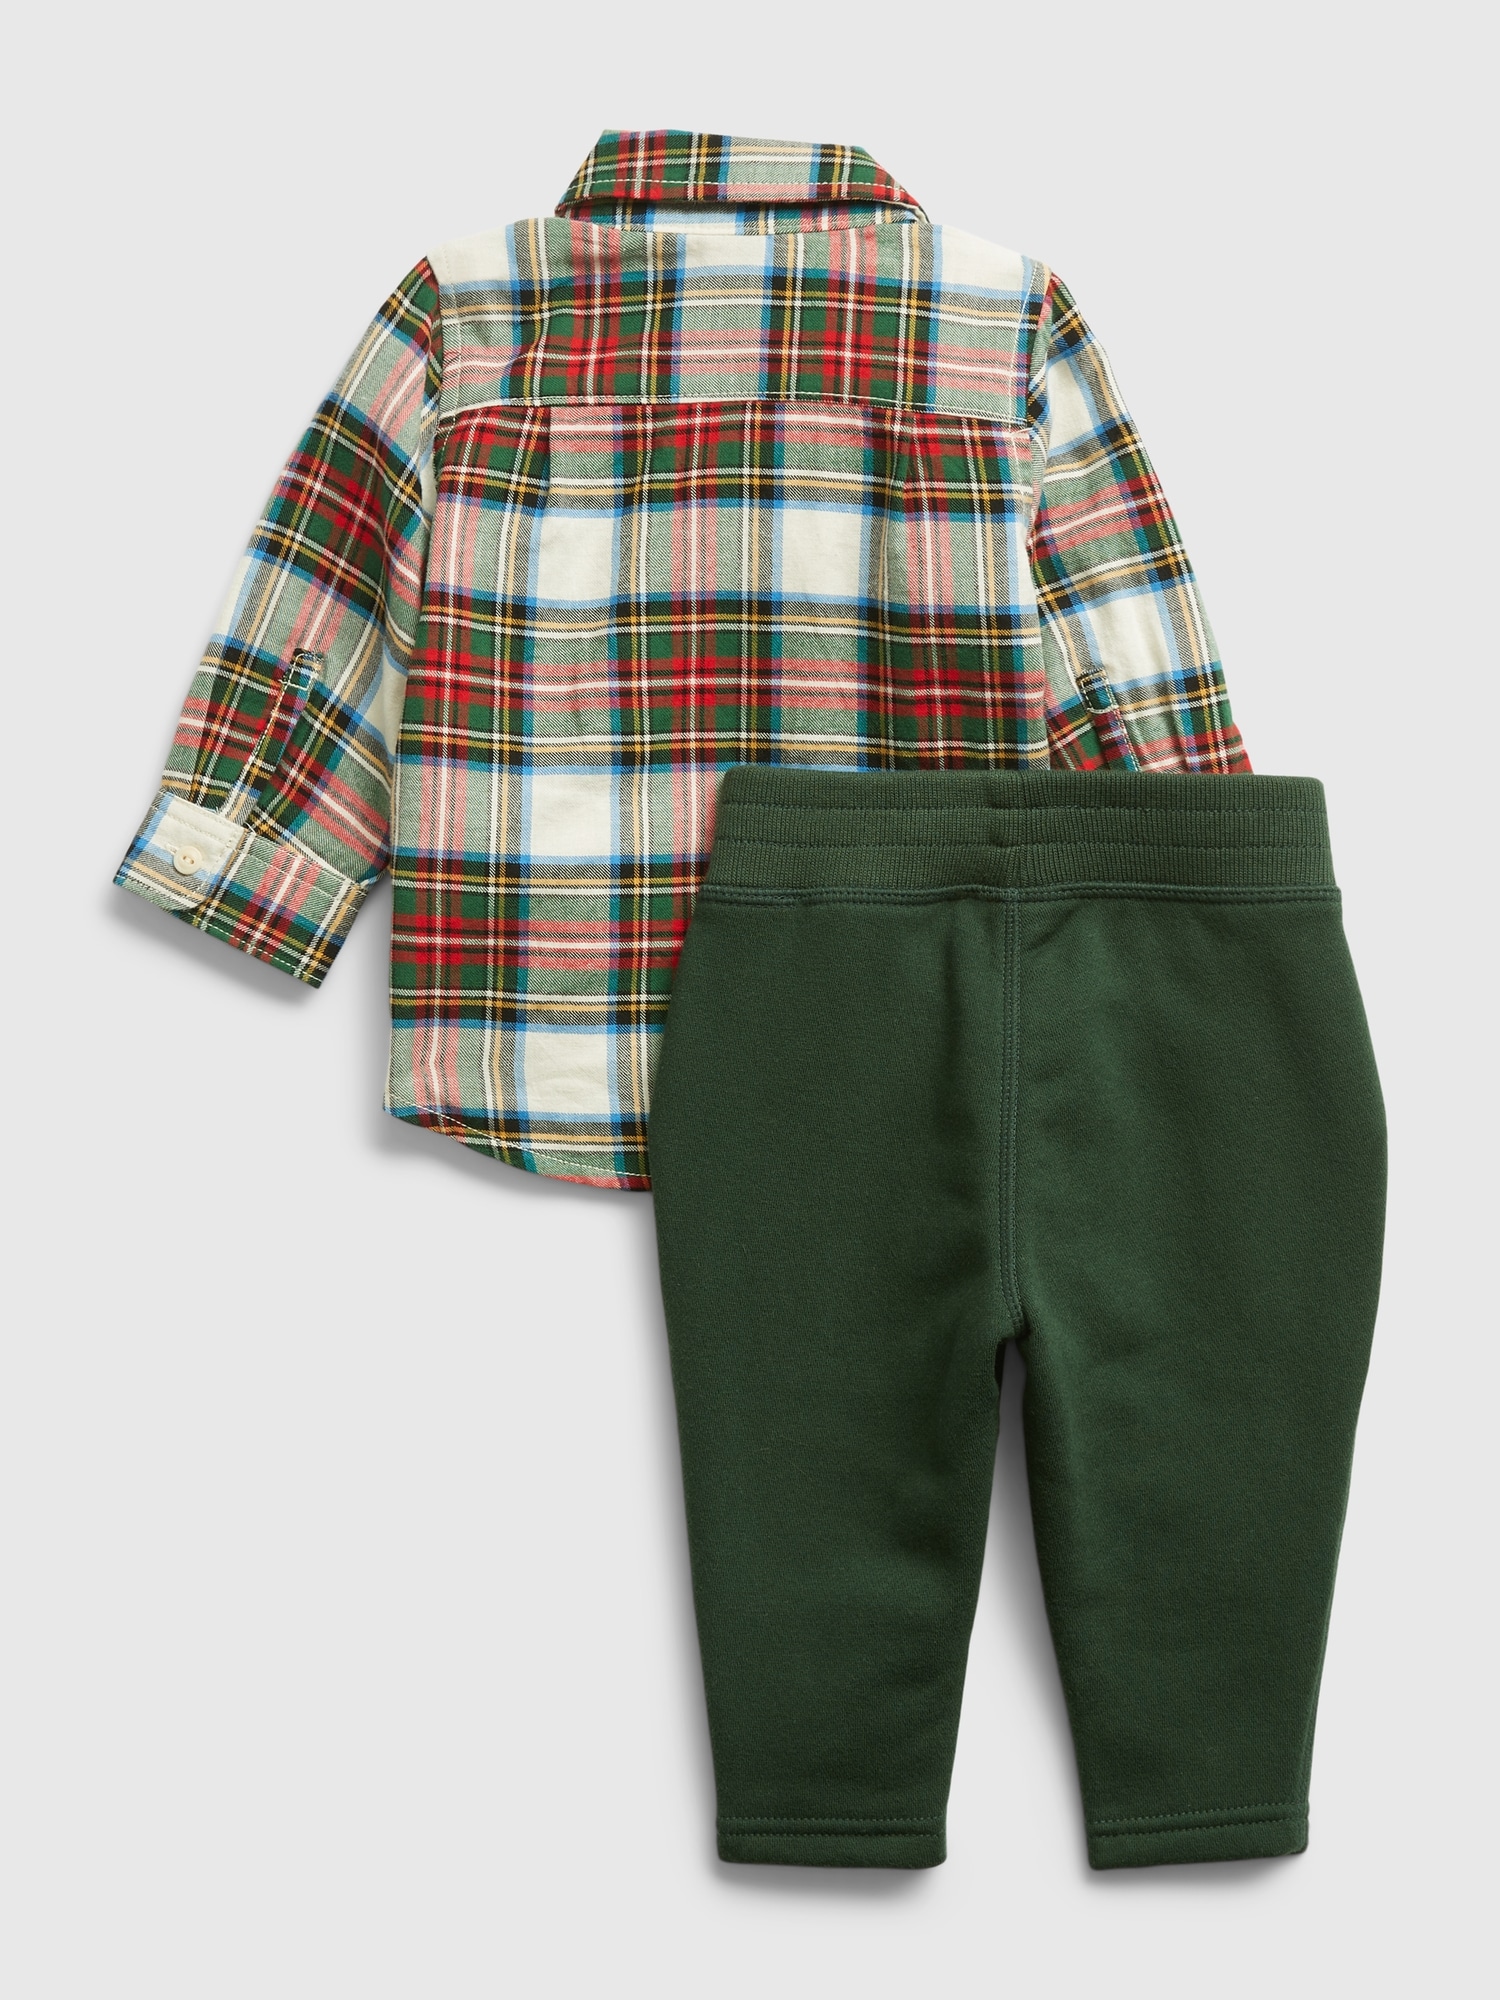 Baby Flannel Shirt Outfit Set | Gap